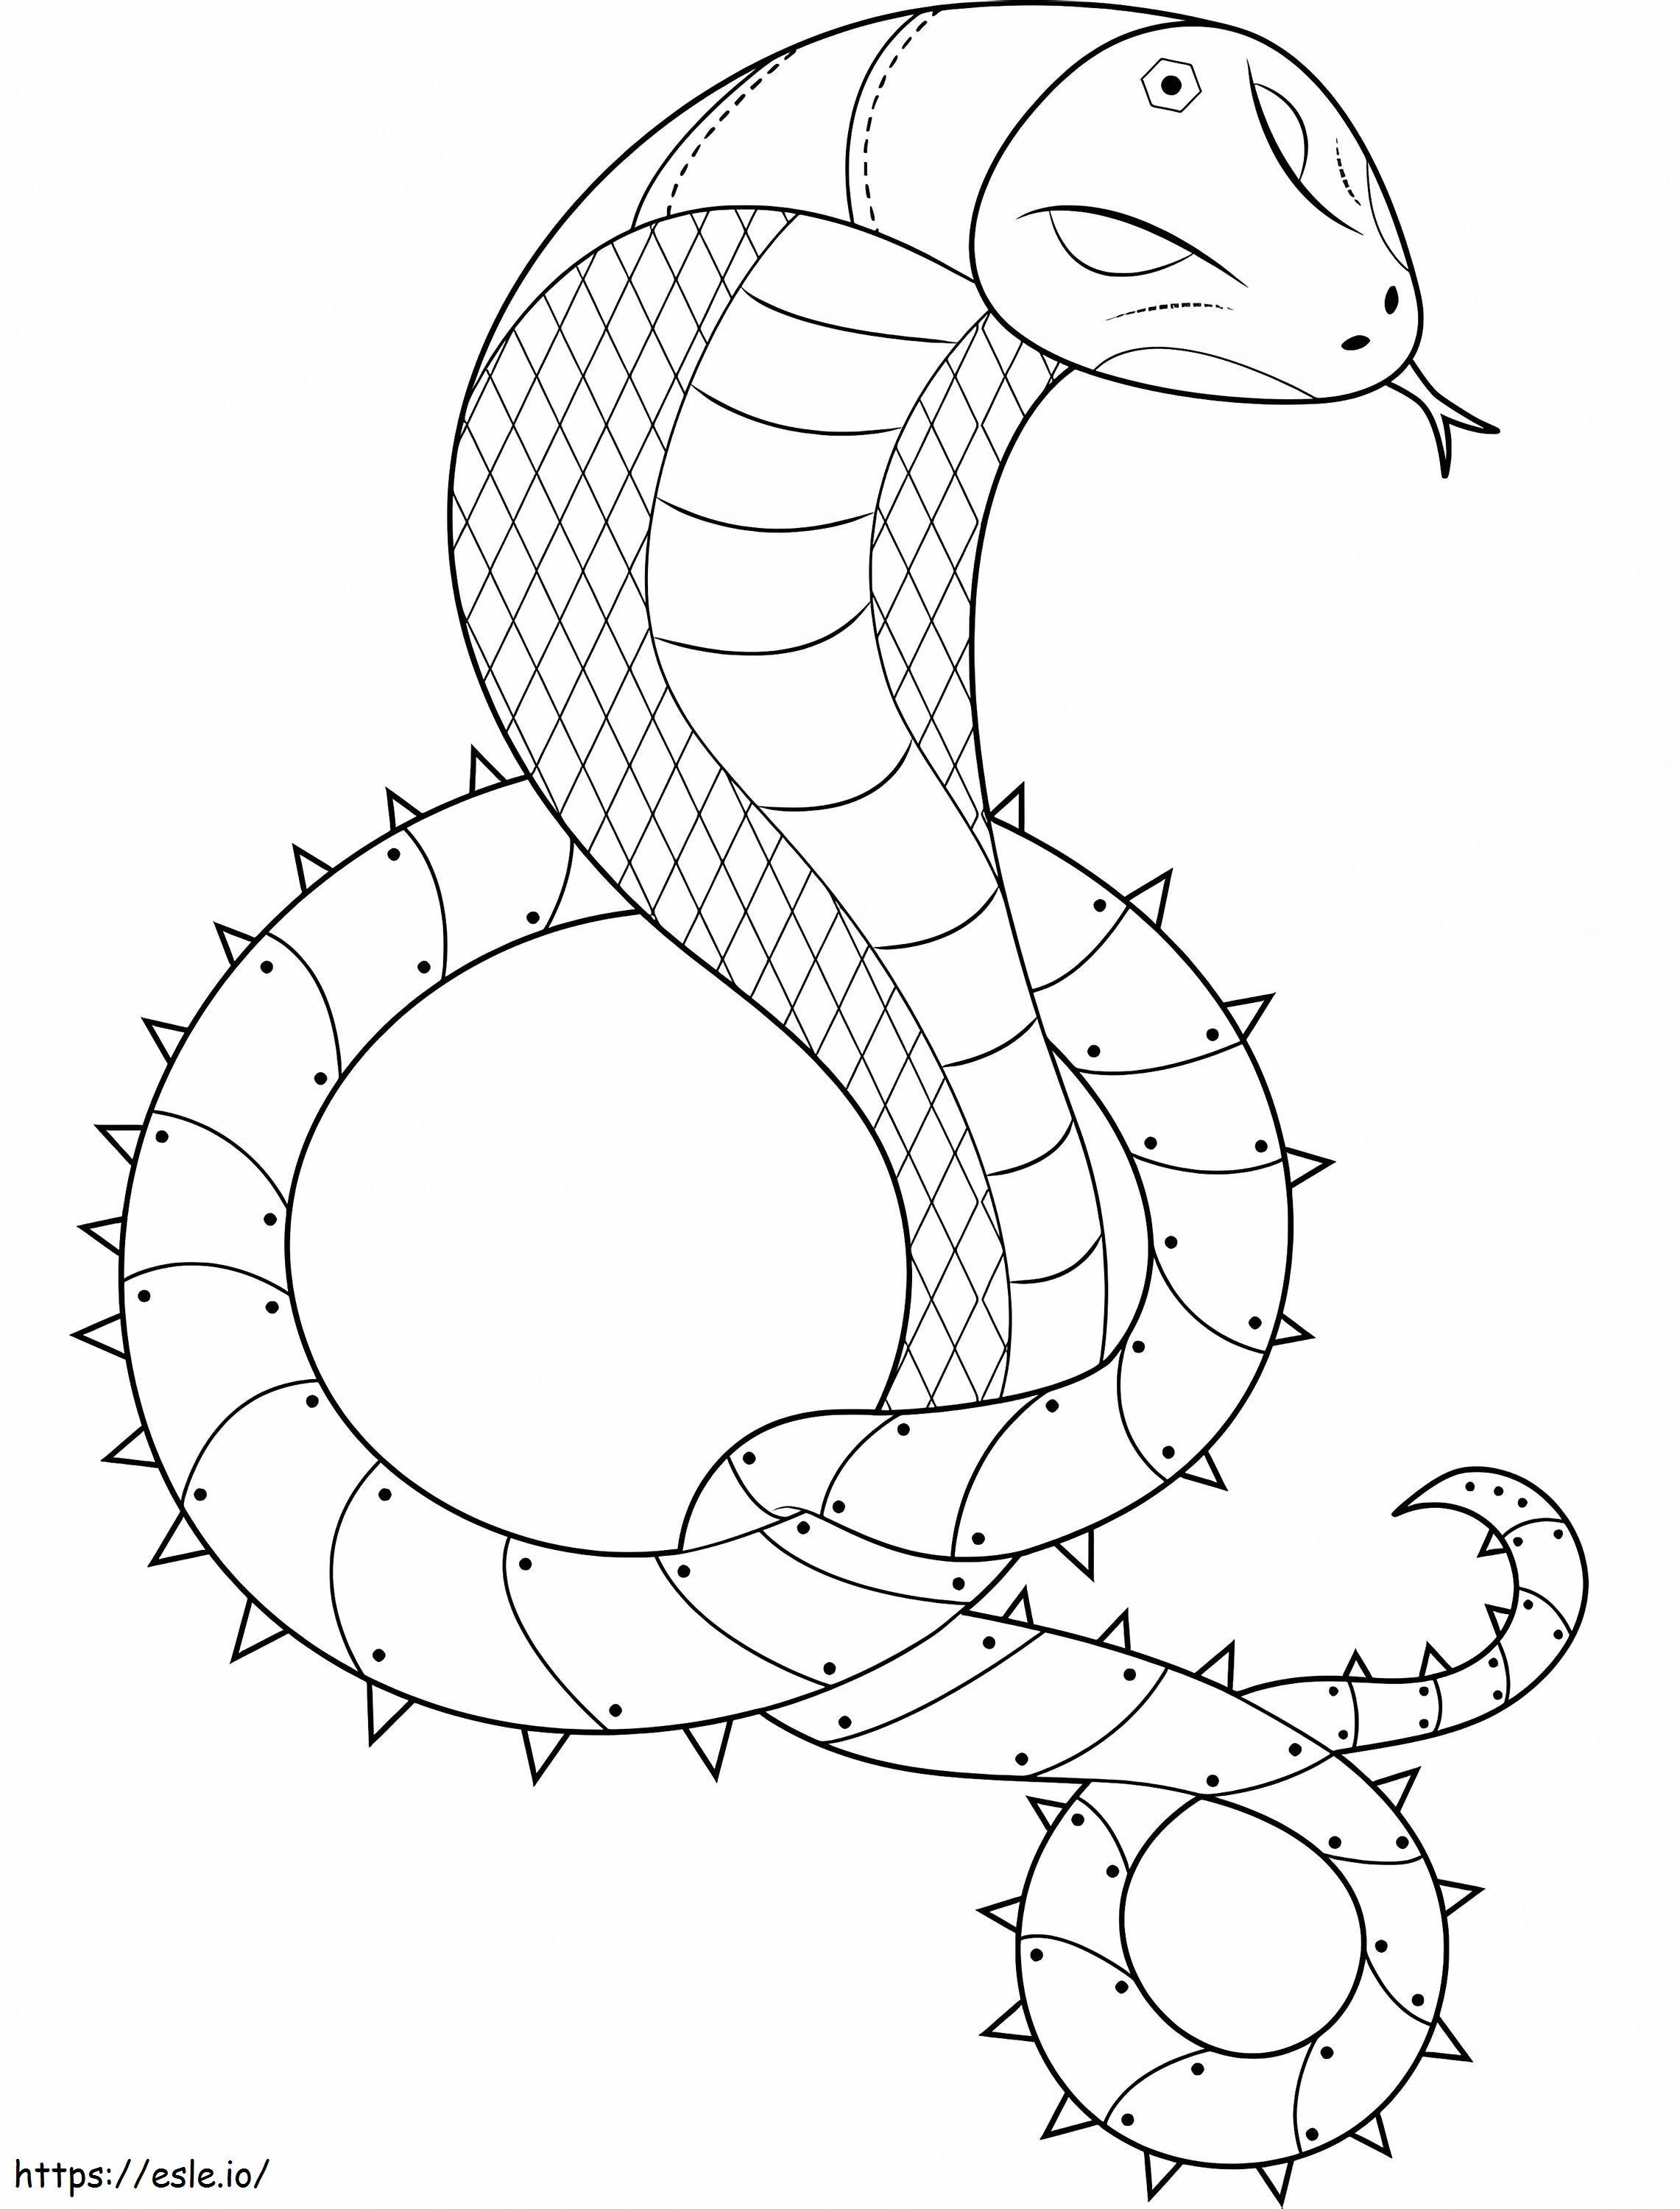 1597882162_Steampunk Cobra coloring page